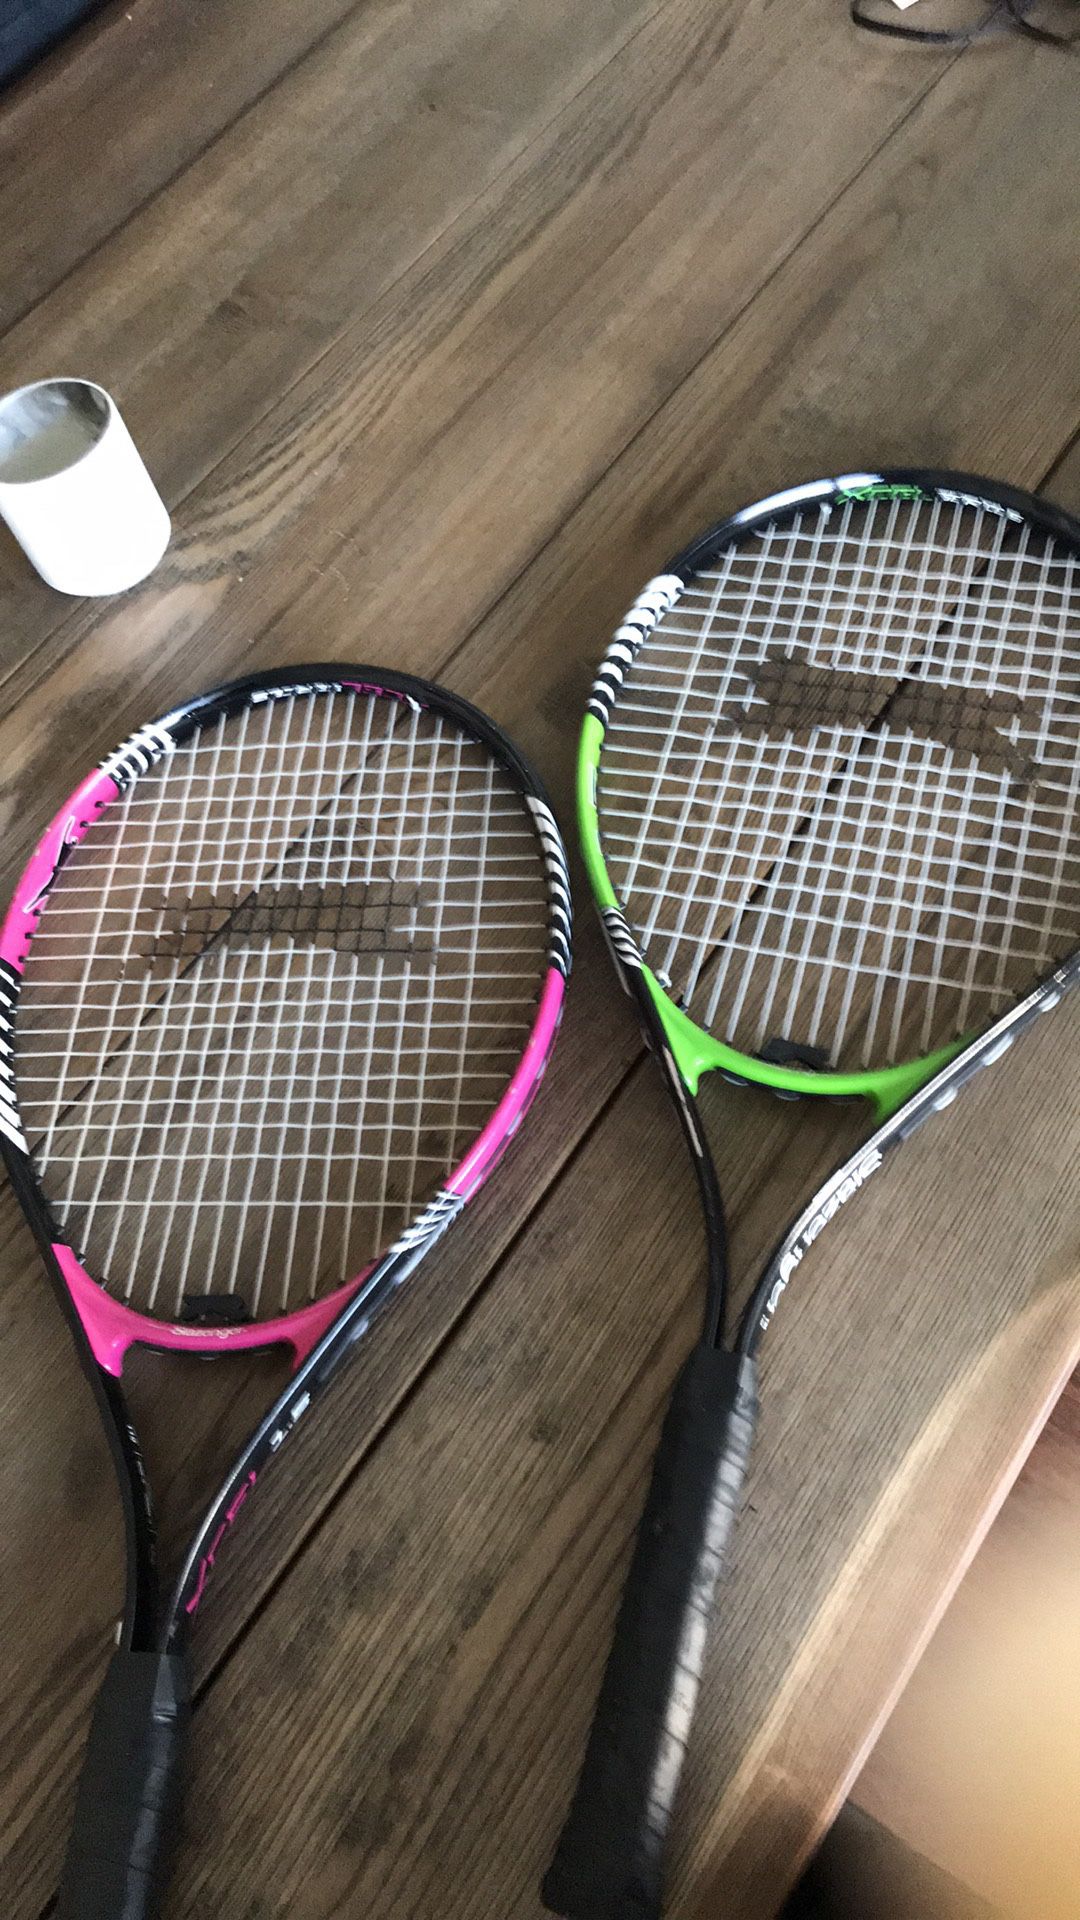 His/ hers tennis